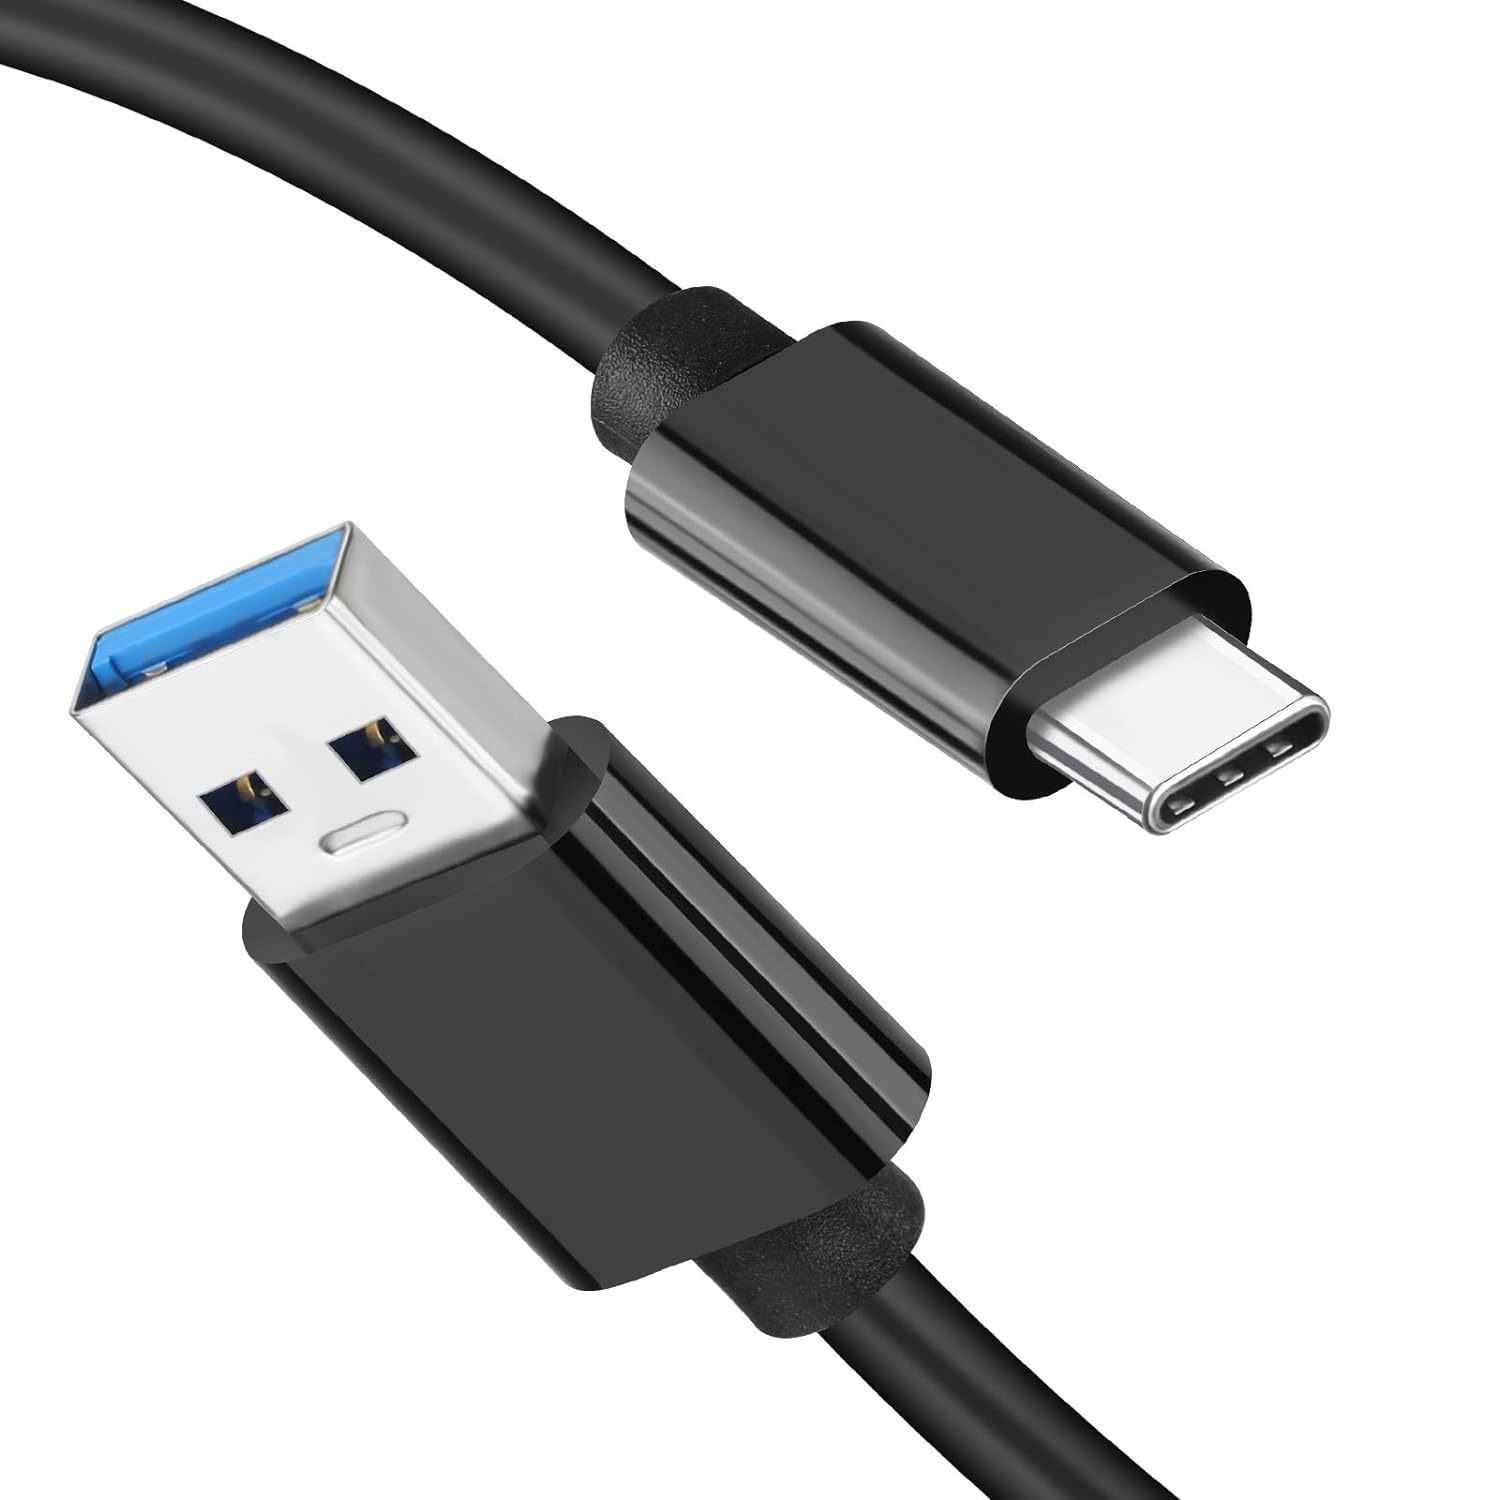 Usb C Cable-3Ft, Usb C To Usb A 3.1 Gen 2 Cable, Type C 3A Fast Charge & 10Gbps  - $12.99